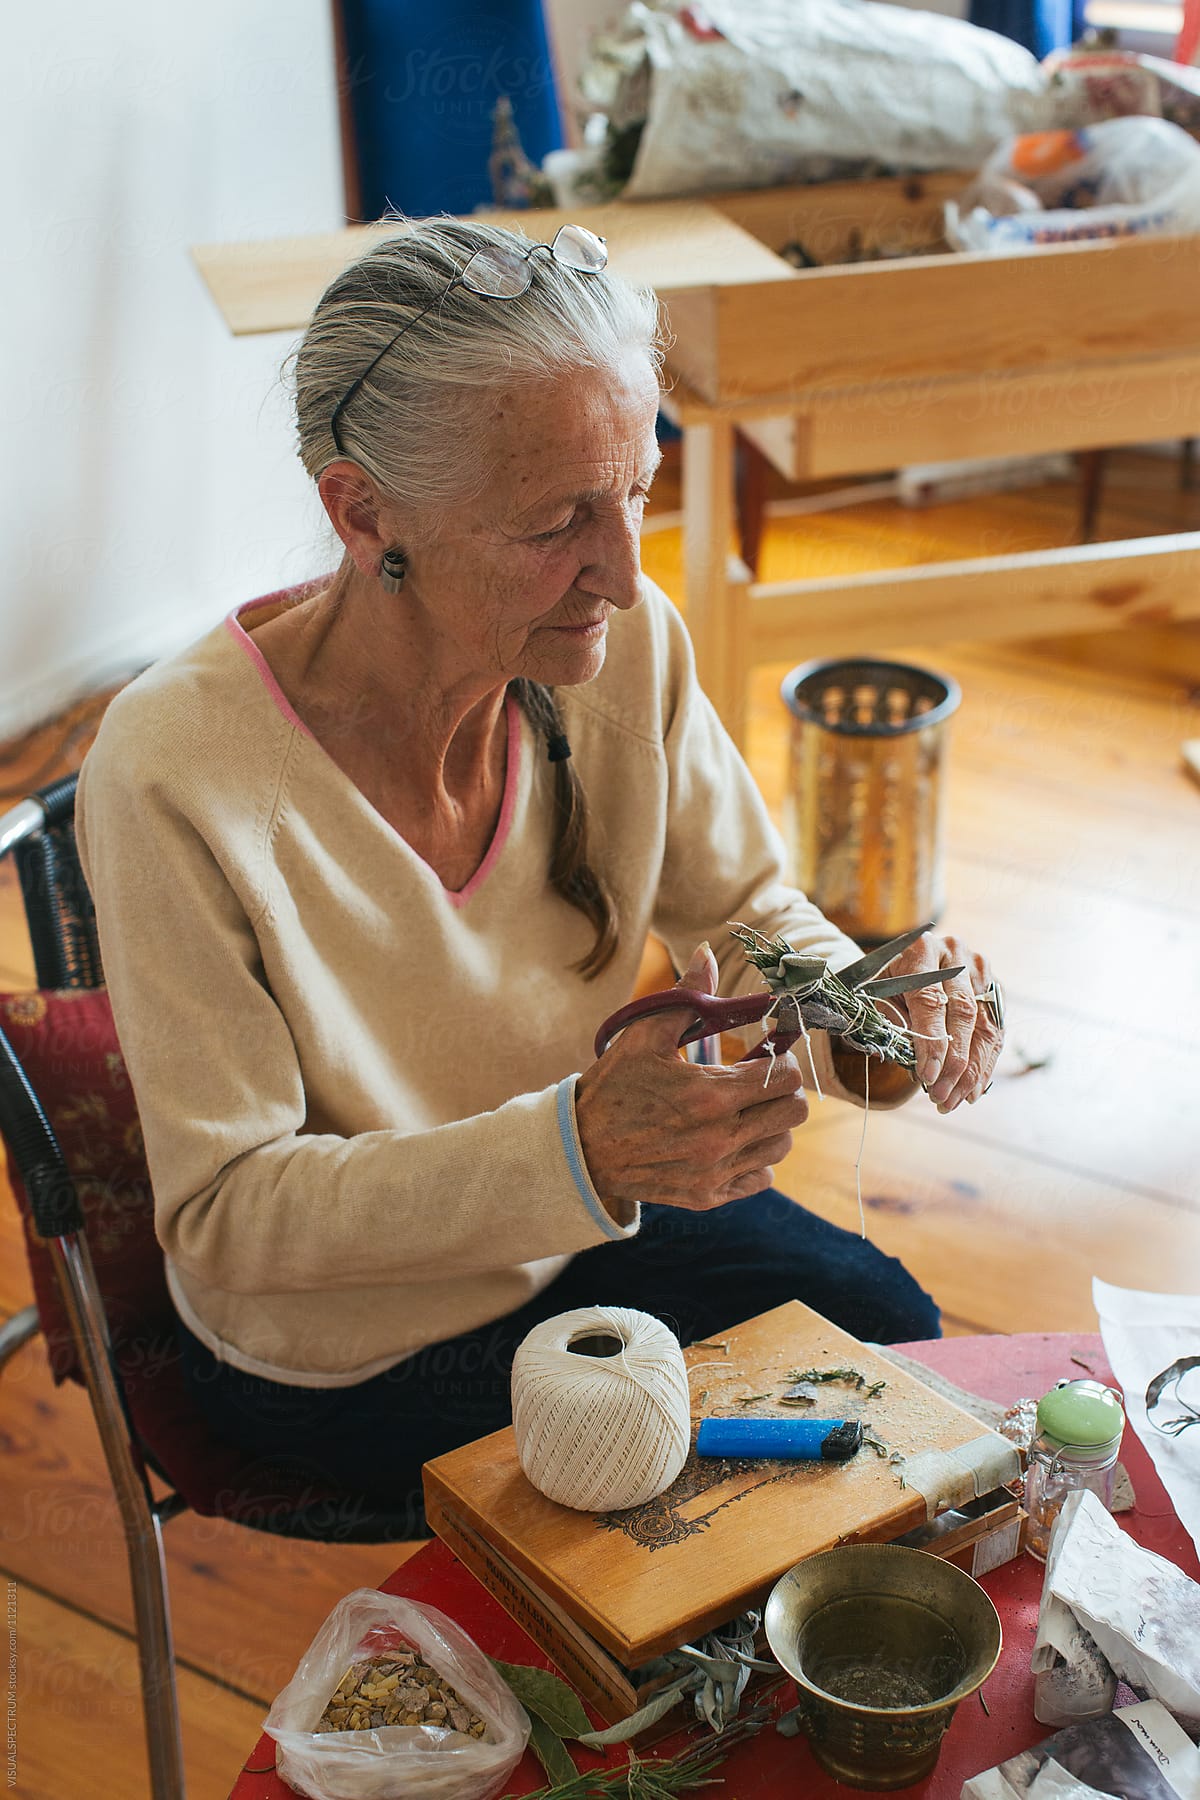 Environmental Portrait of Senior Woman with Grey Hair Making Smudge Stick